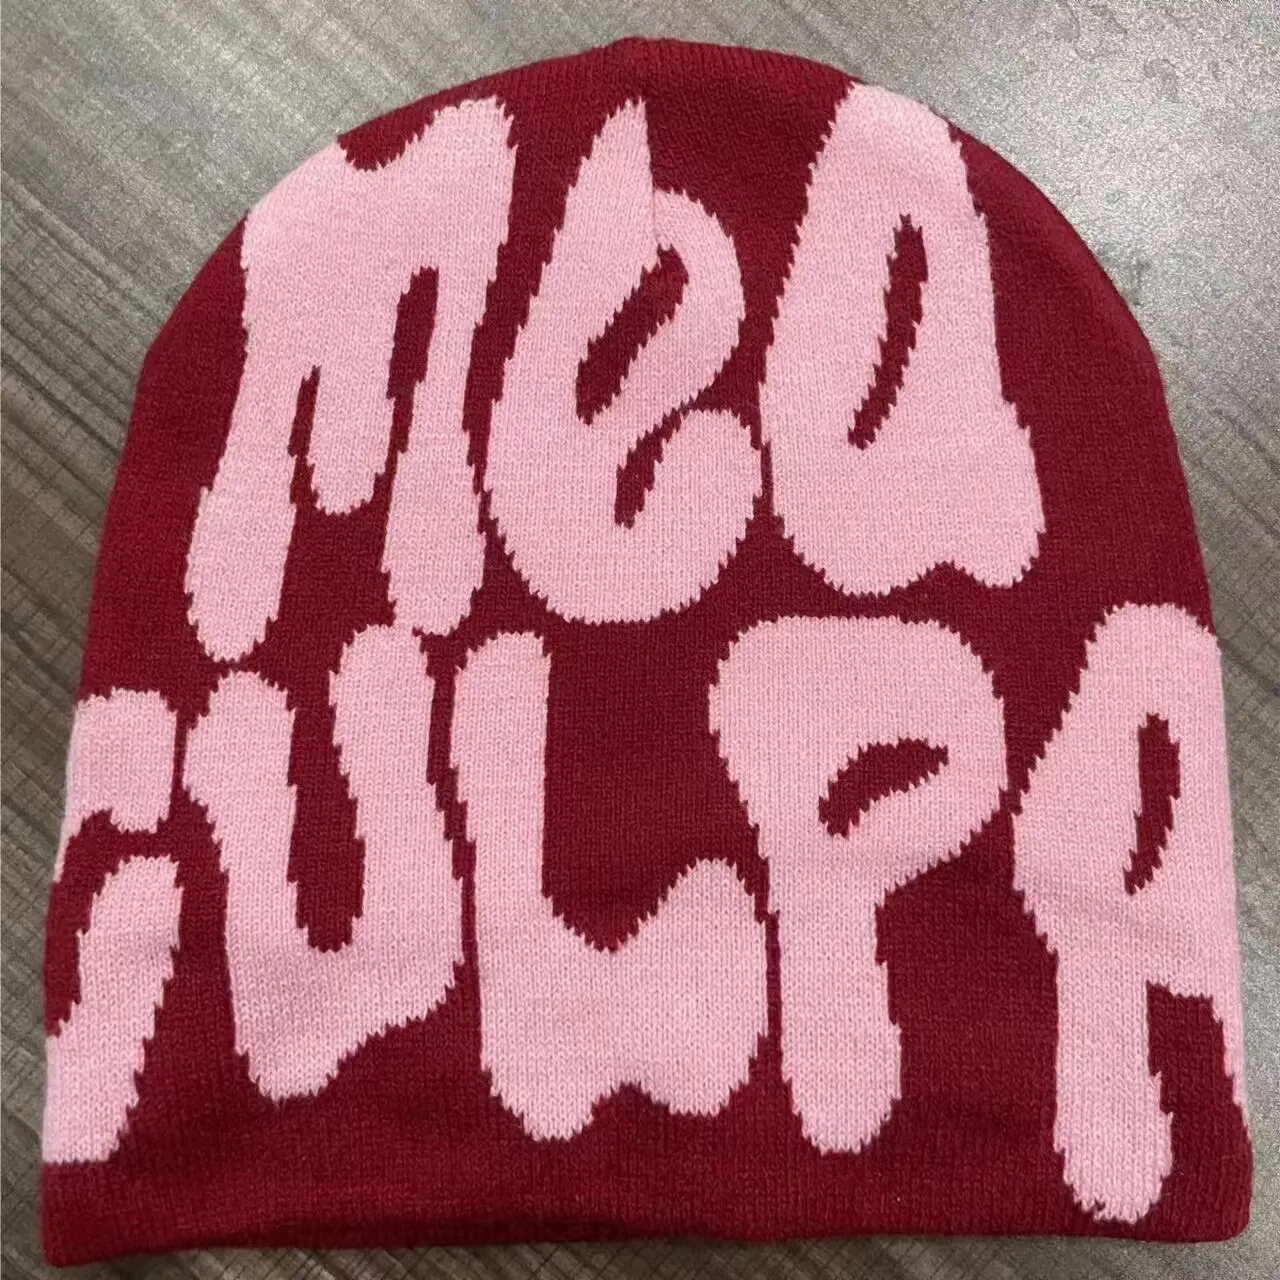 uxury hats designers women pink y2k beanie for men mea culpas fashion casual autumn winter warmth casquette christmas day gift lovers knited cap soft q70